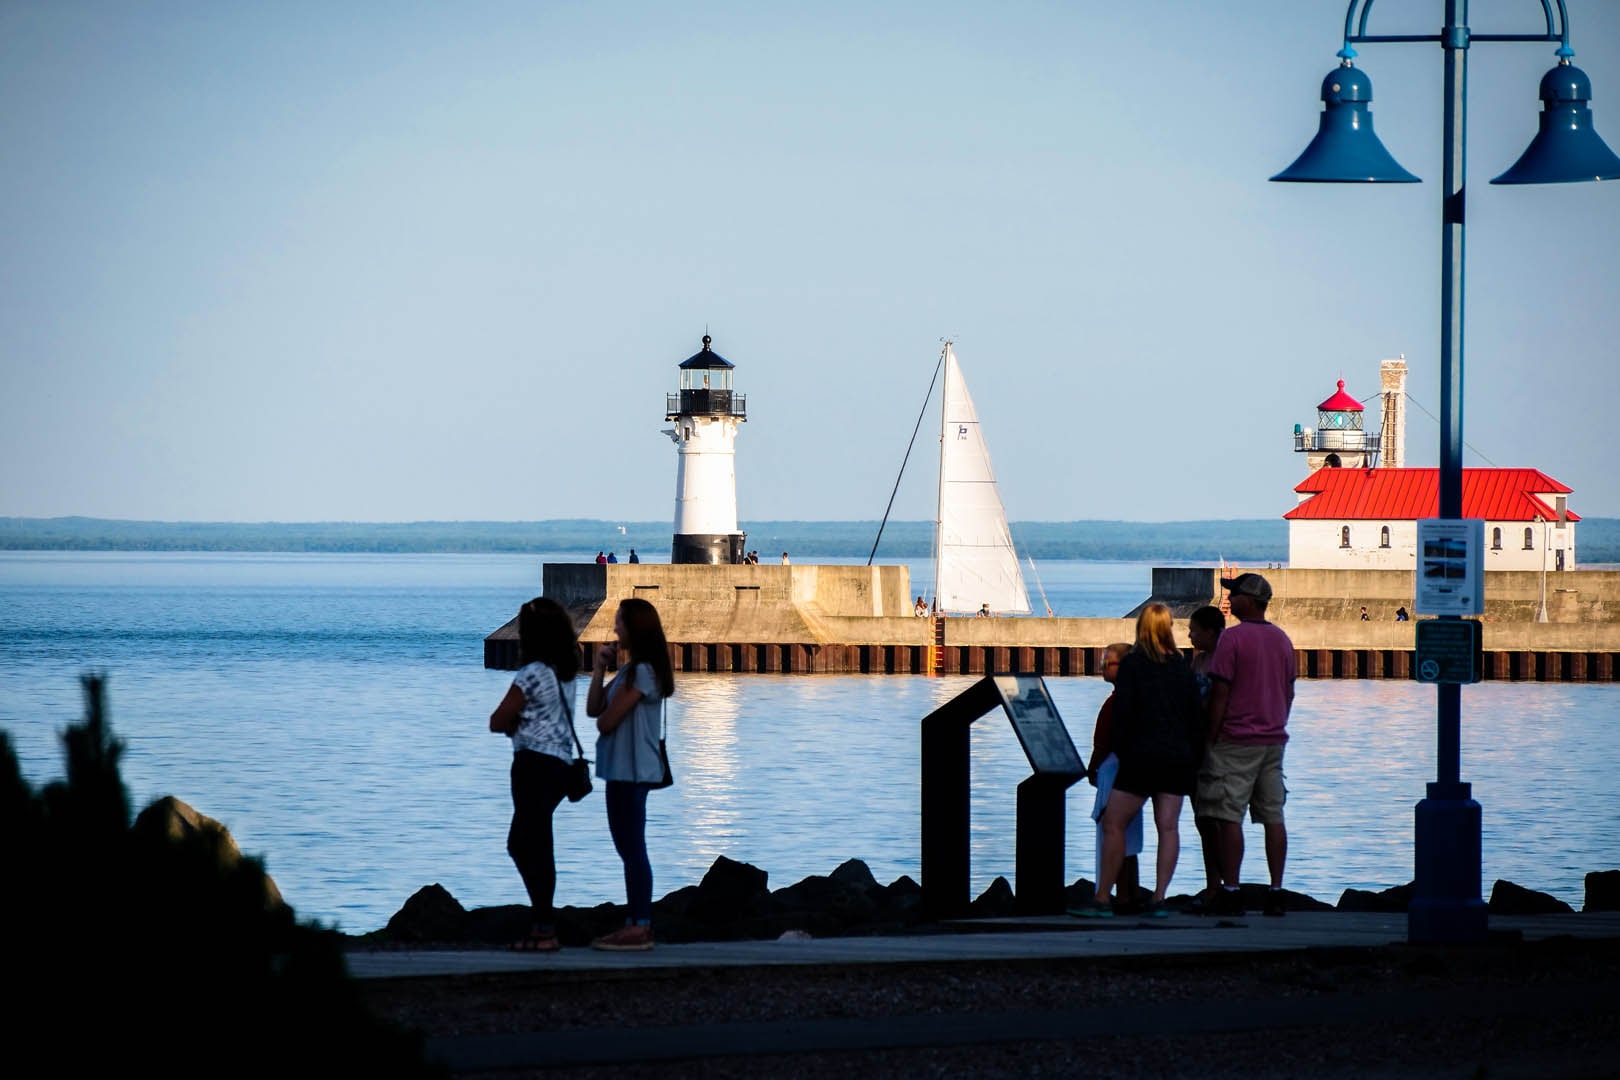 Two groups of people in silhouette looking out at very blue water with the piers and lighthouses behind in full sun.